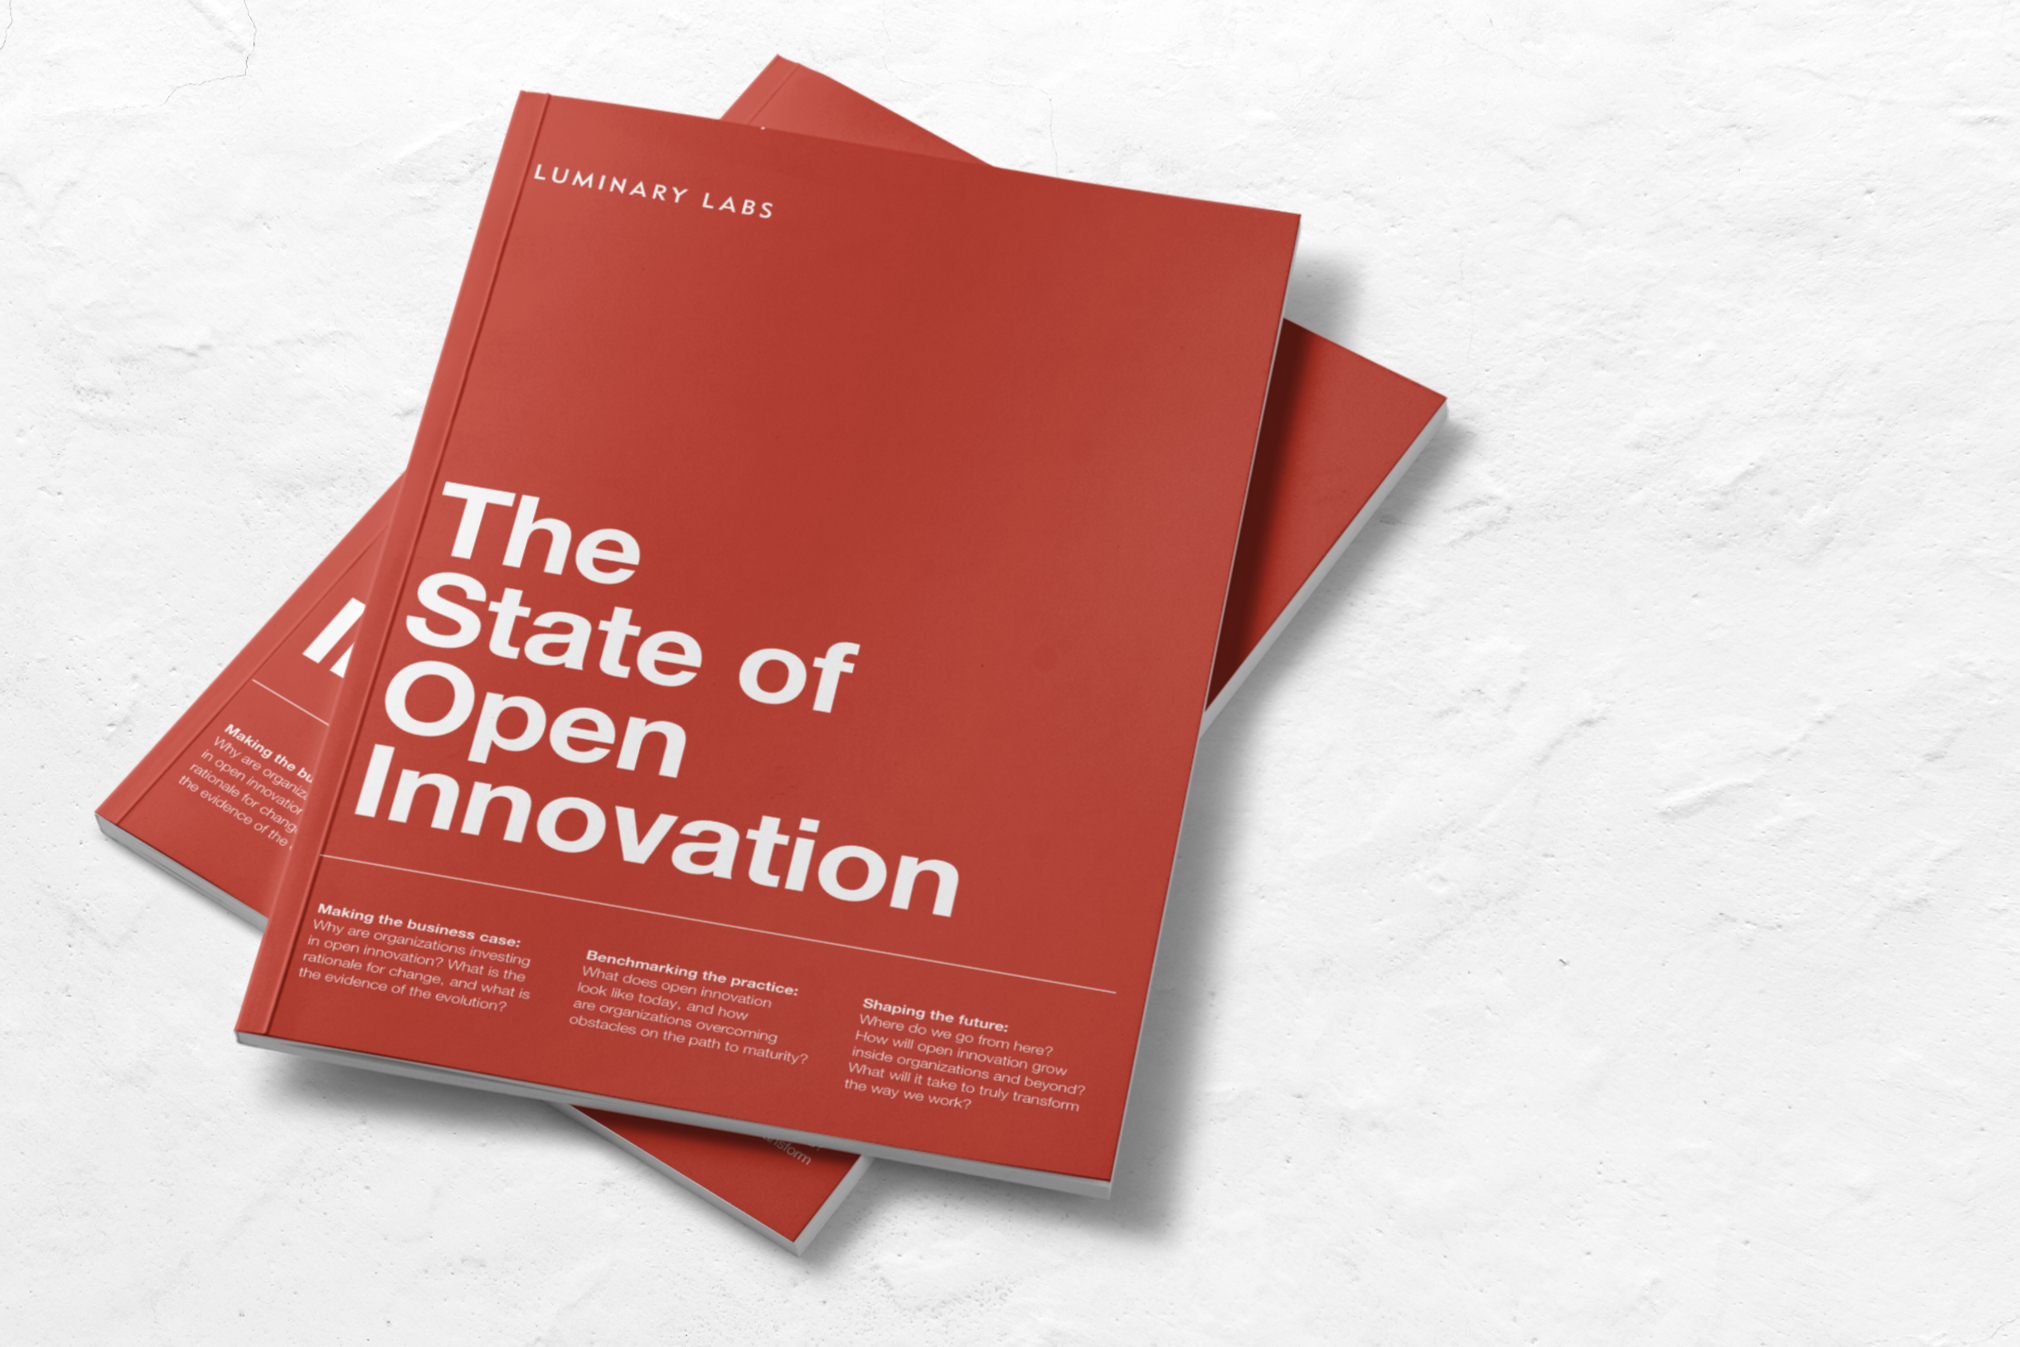 Introducing the State of Open Innovation